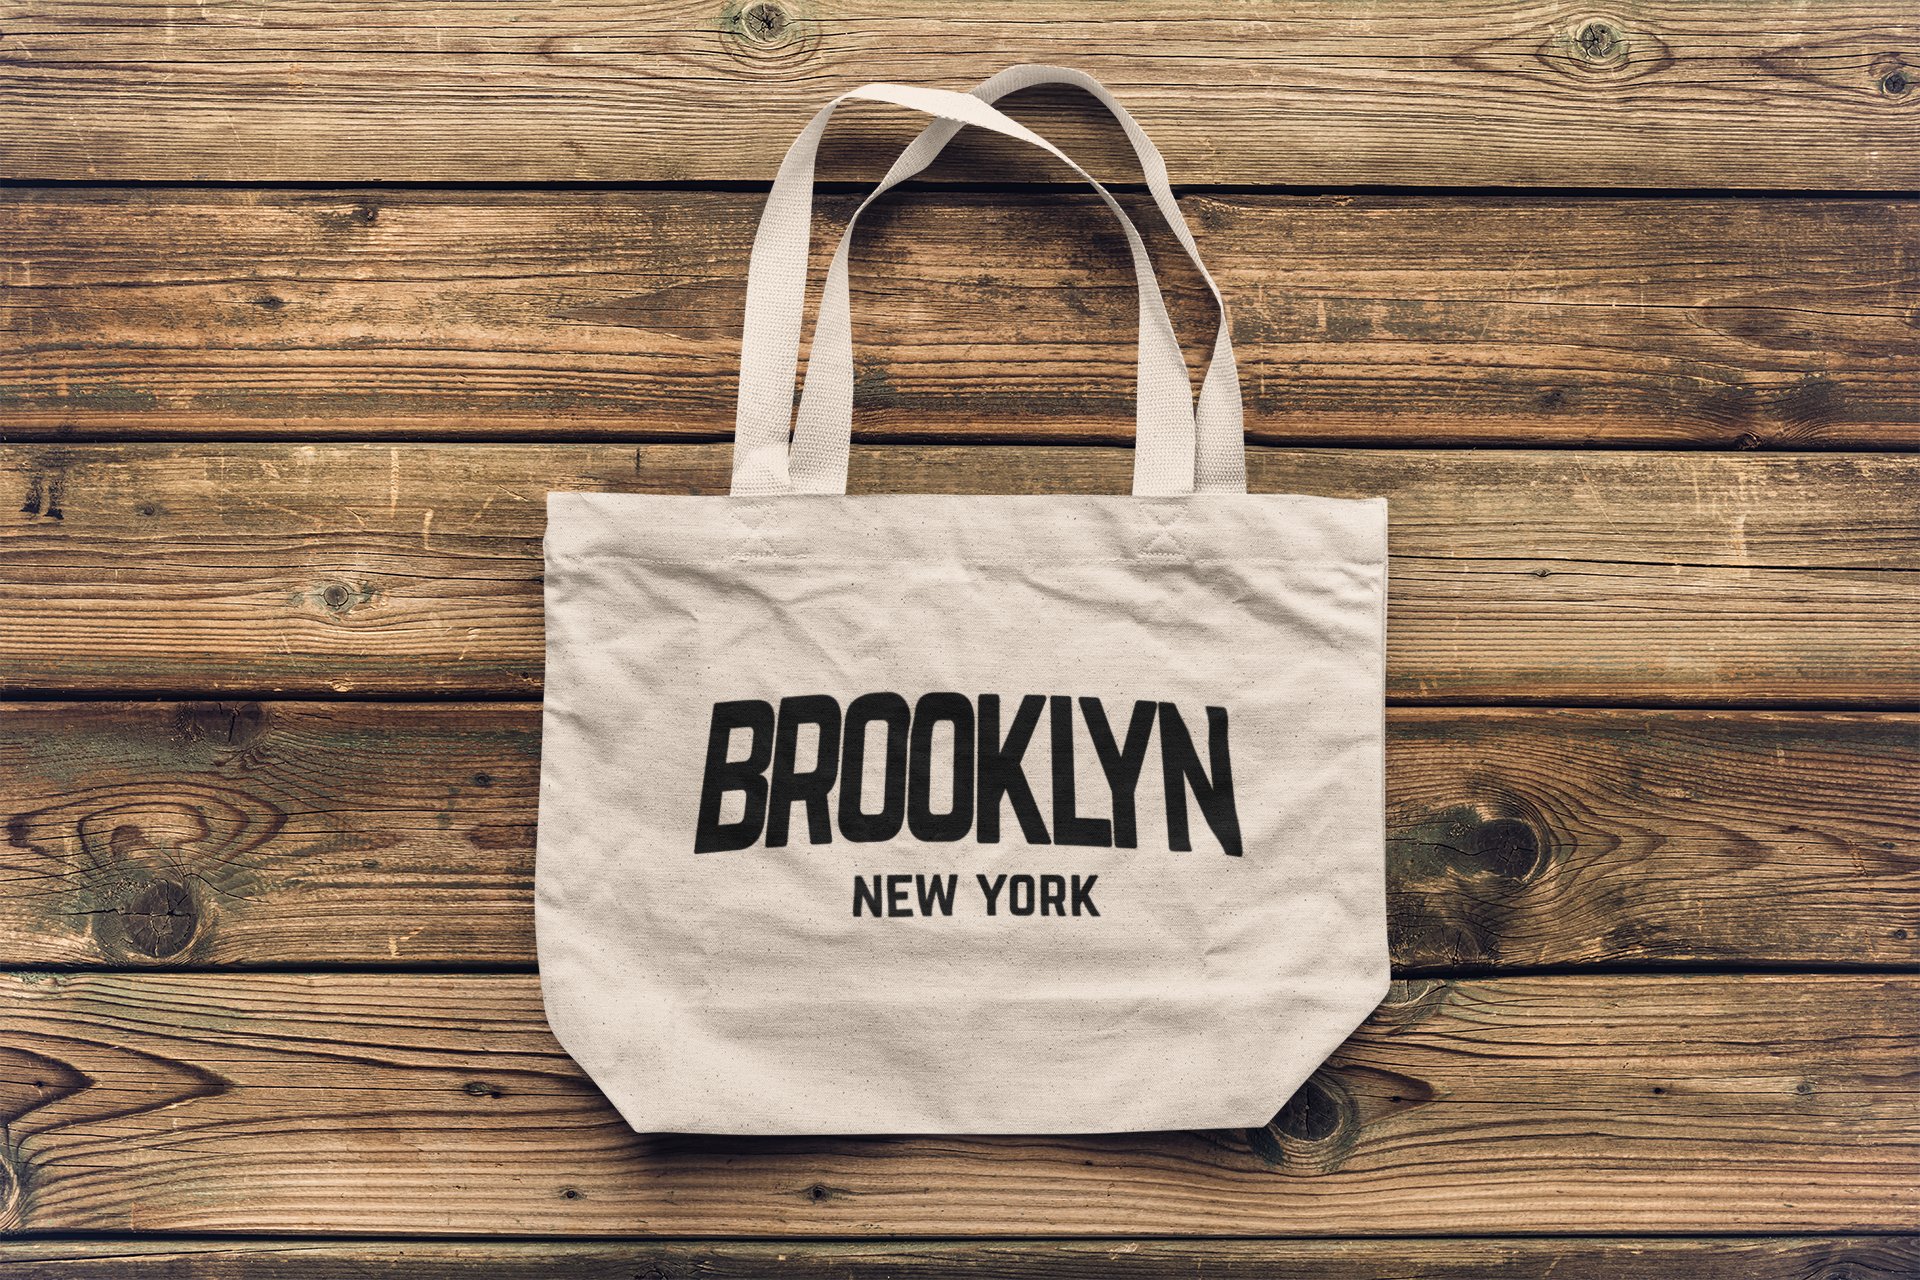 Jumbo Size Vintage Style Retro City Cotton Canvas Tote Bags (Brooklyn)